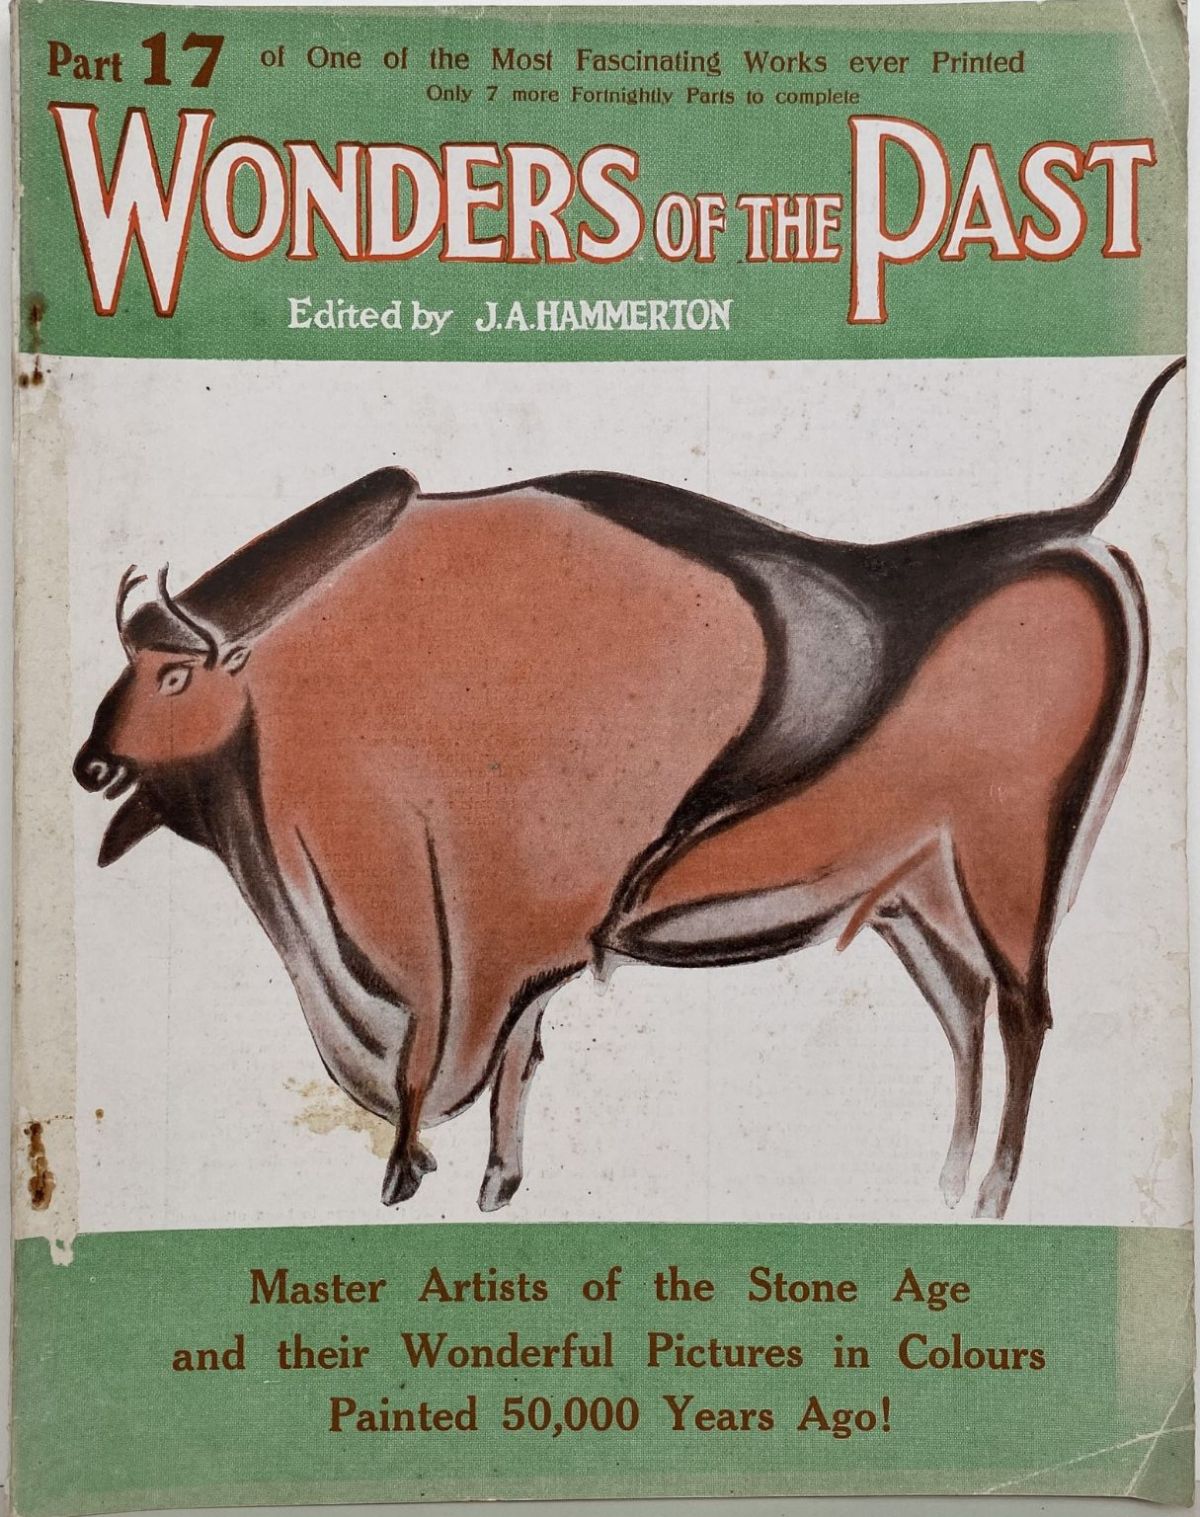 WONDERS of the PAST: Part 17